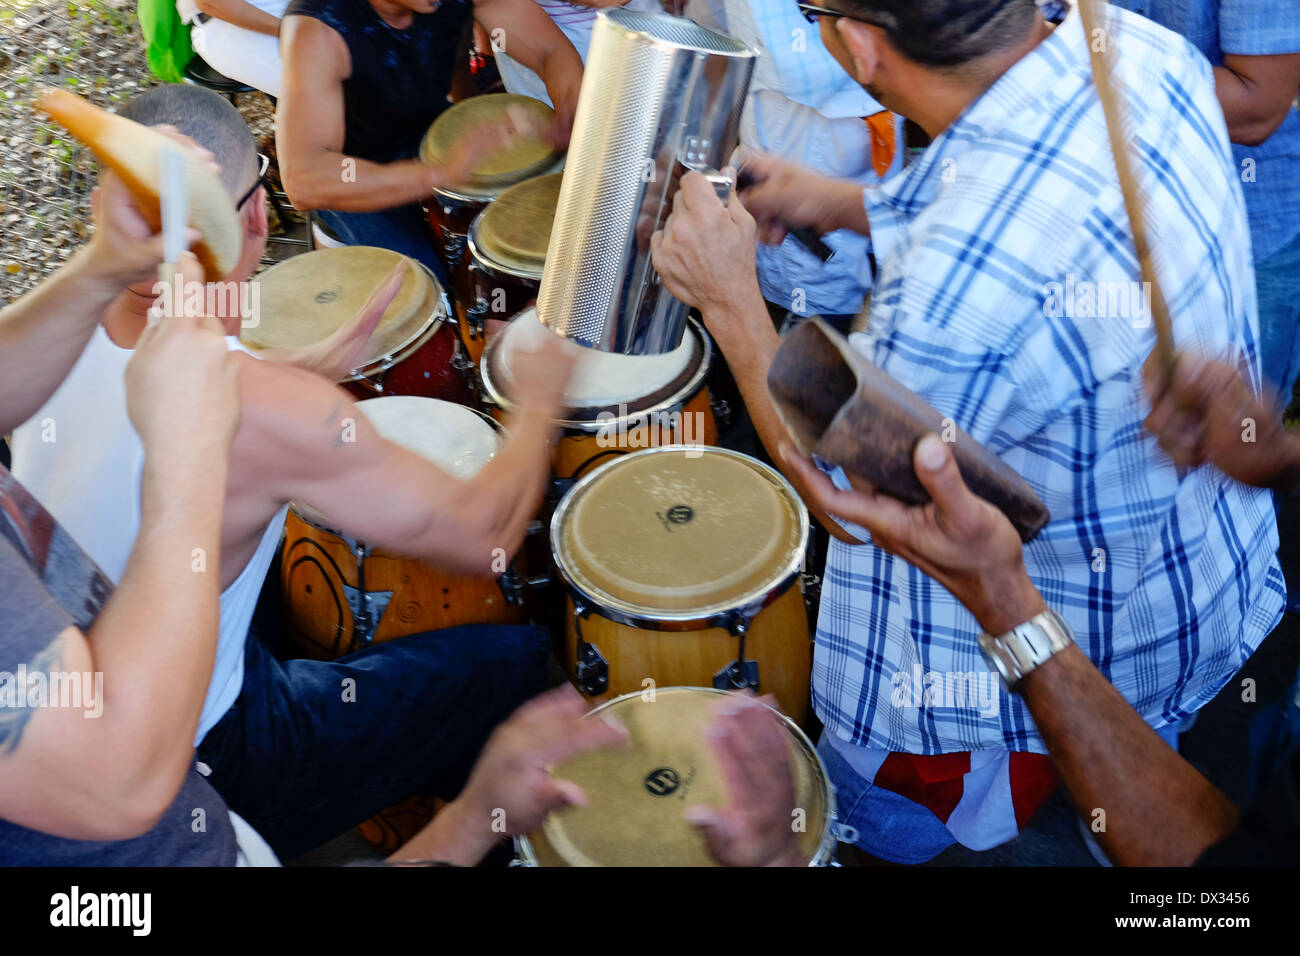 MIAMI - MARCH 9, 2014: Band playing music in the streets of calle 8 during the  37th Calle Ocho festival, an annual event that takes place over Eight Street in Little Havana featuring plenty of music, food, and  it is the biggest party in town that celebrates hispanic heritage. Stock Photo